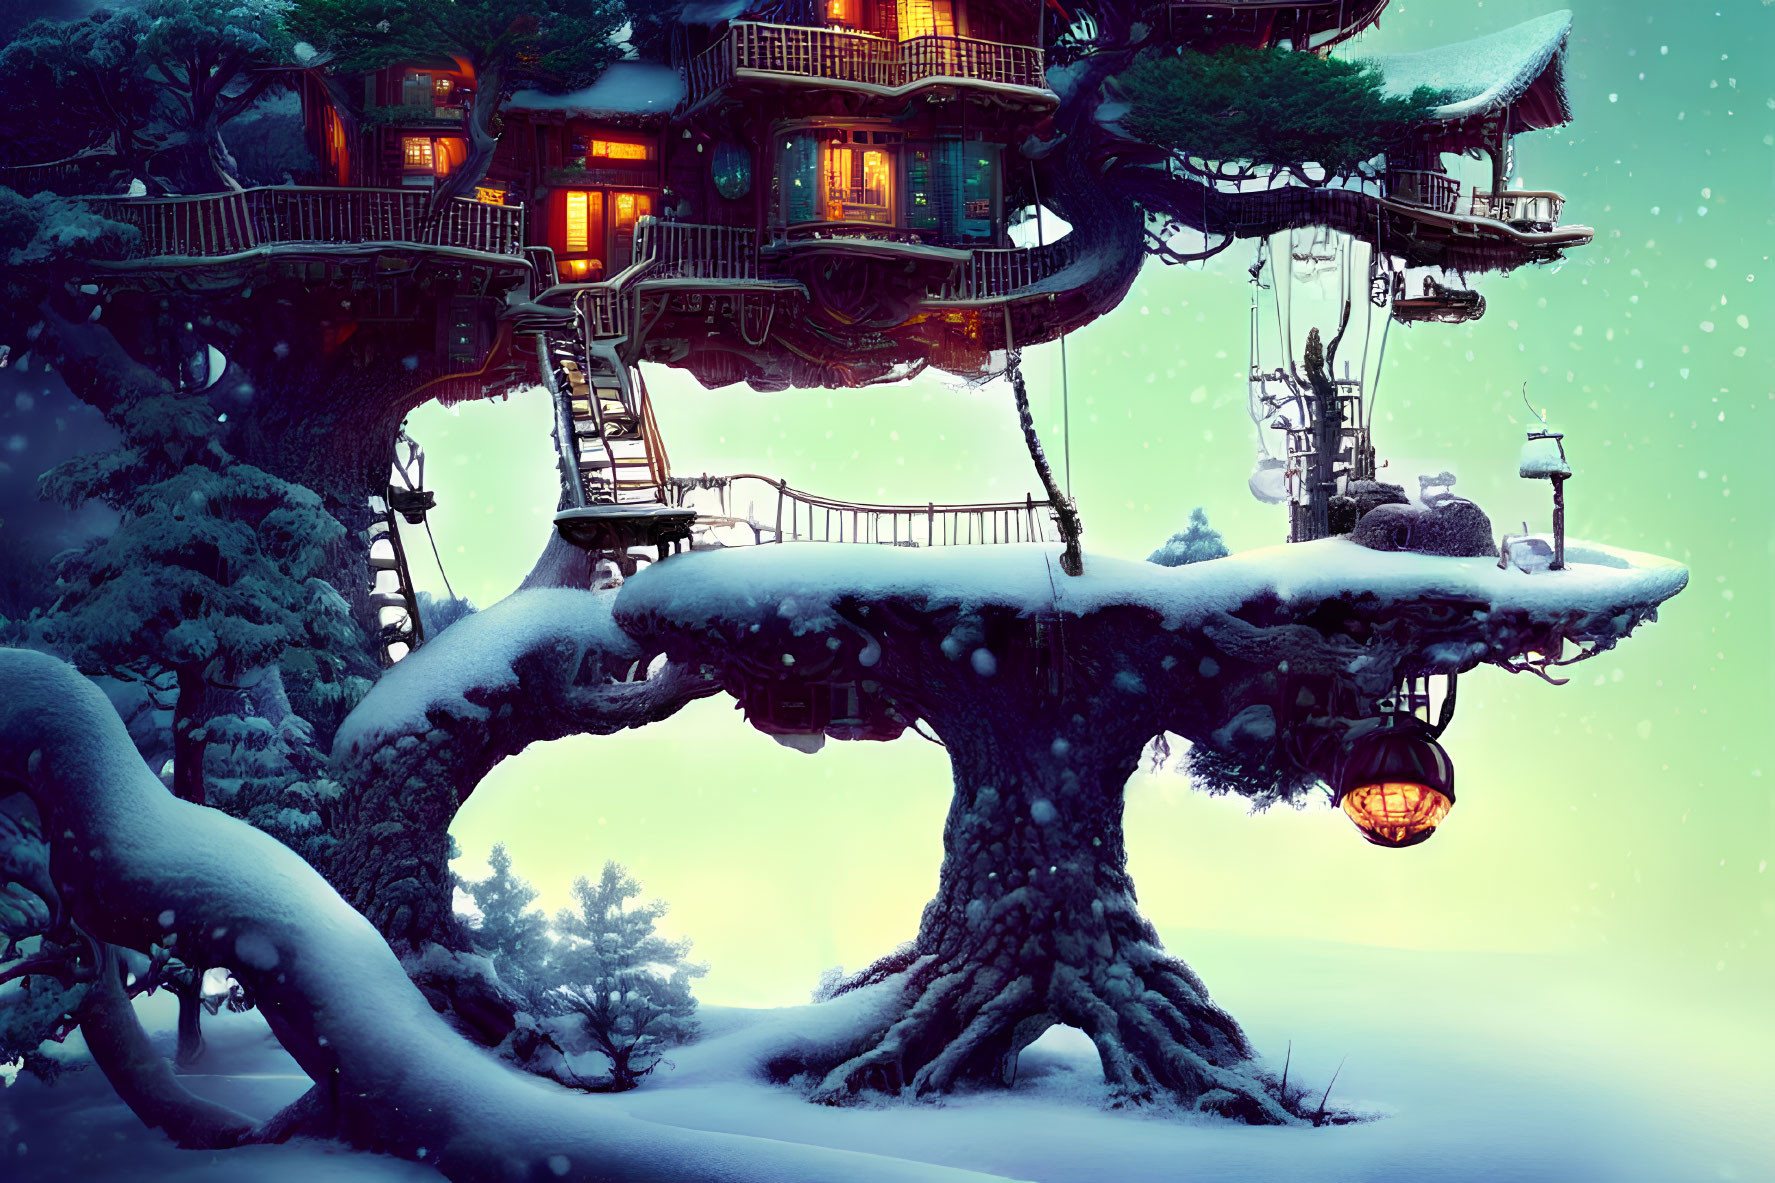 Snowy treehouse nestled in ancient tree with warm glowing lights